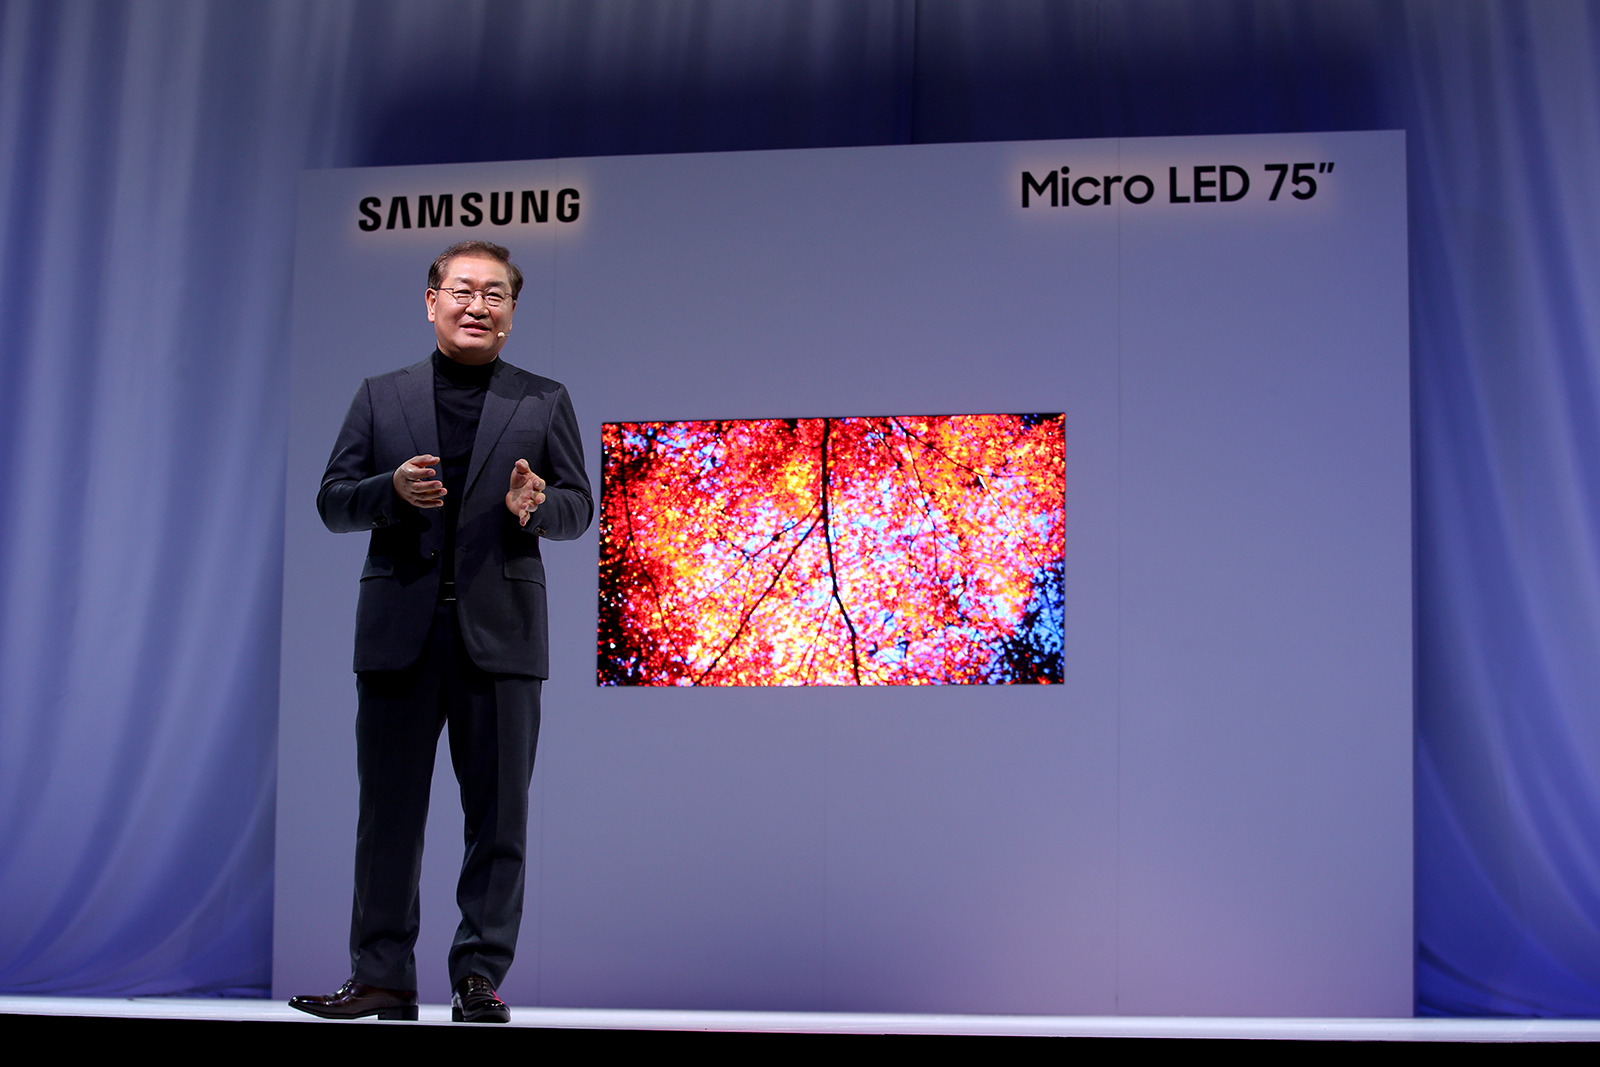 Samsung 75-inch, 4K MicroLED display on stage at CES 2019